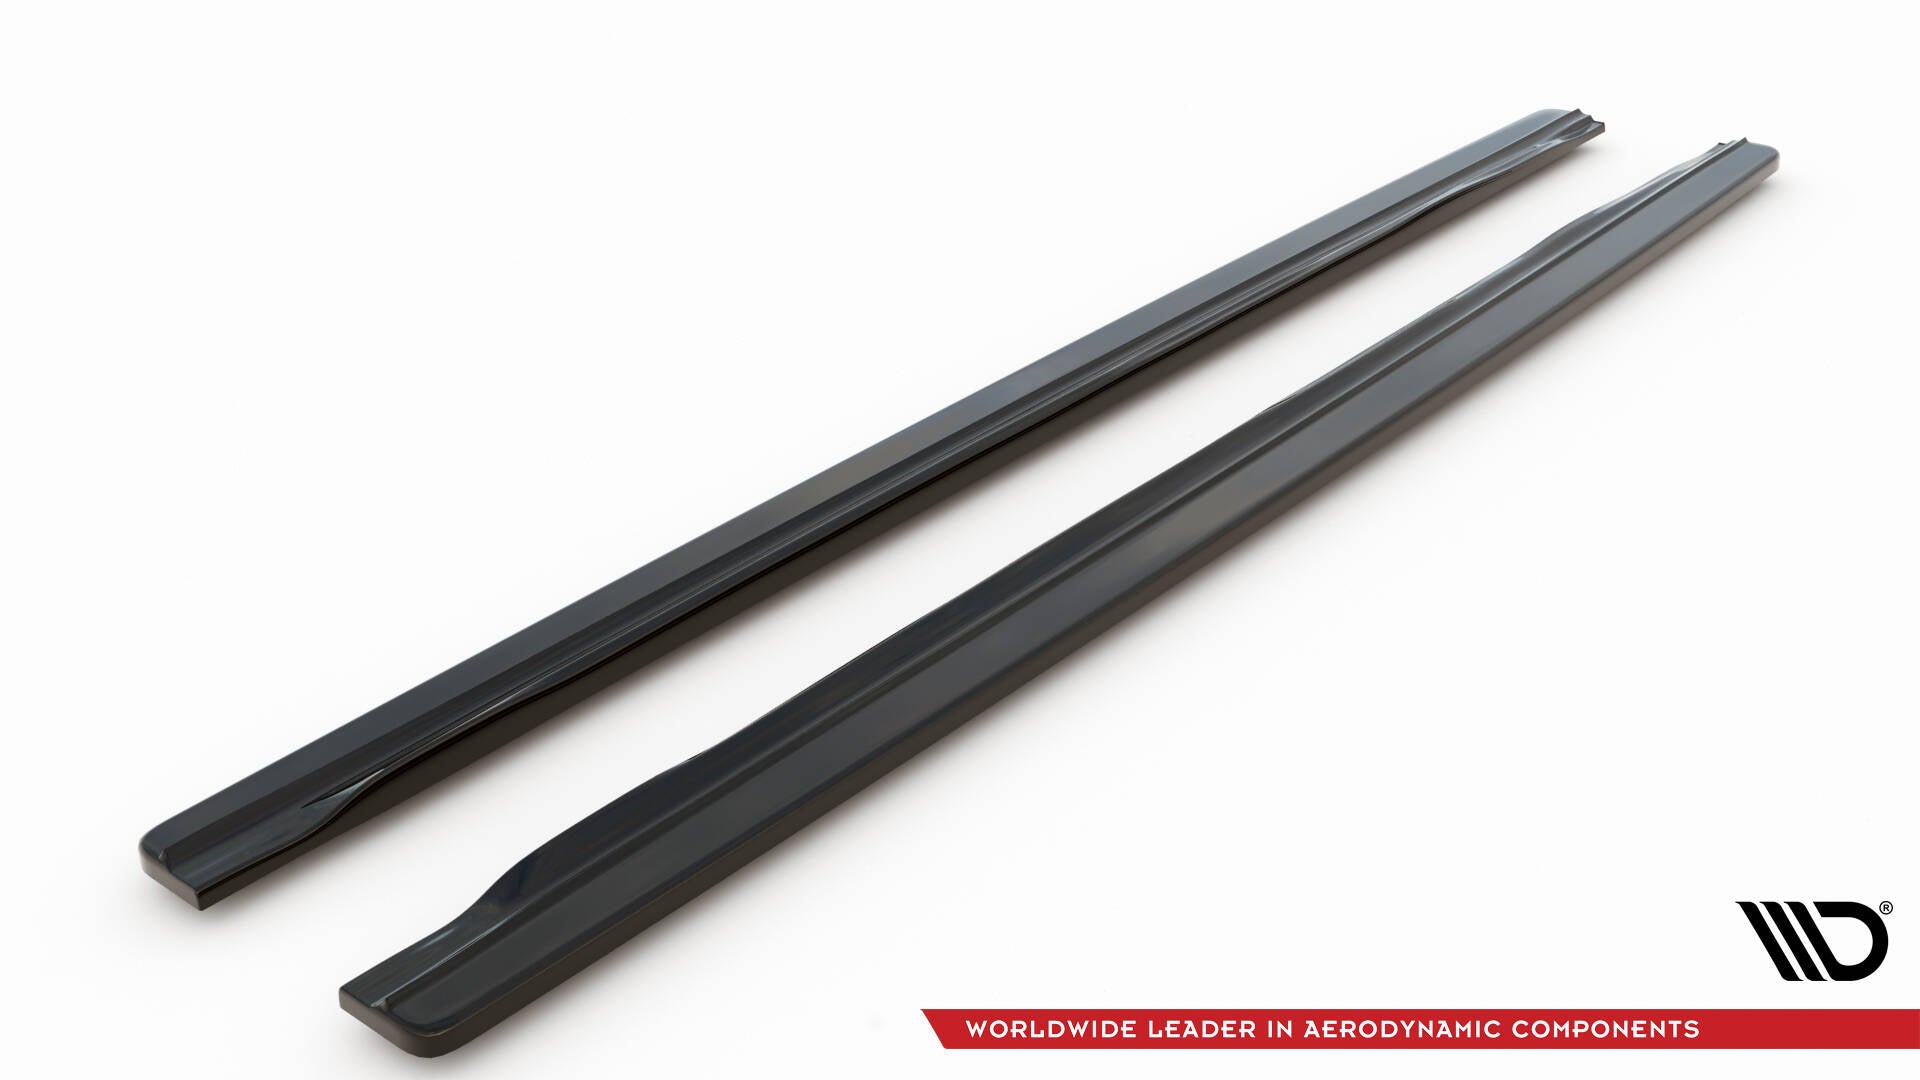 Side Skirts Diffusers Audi S5 / A5 / A5 S-Line 8T / 8T FL